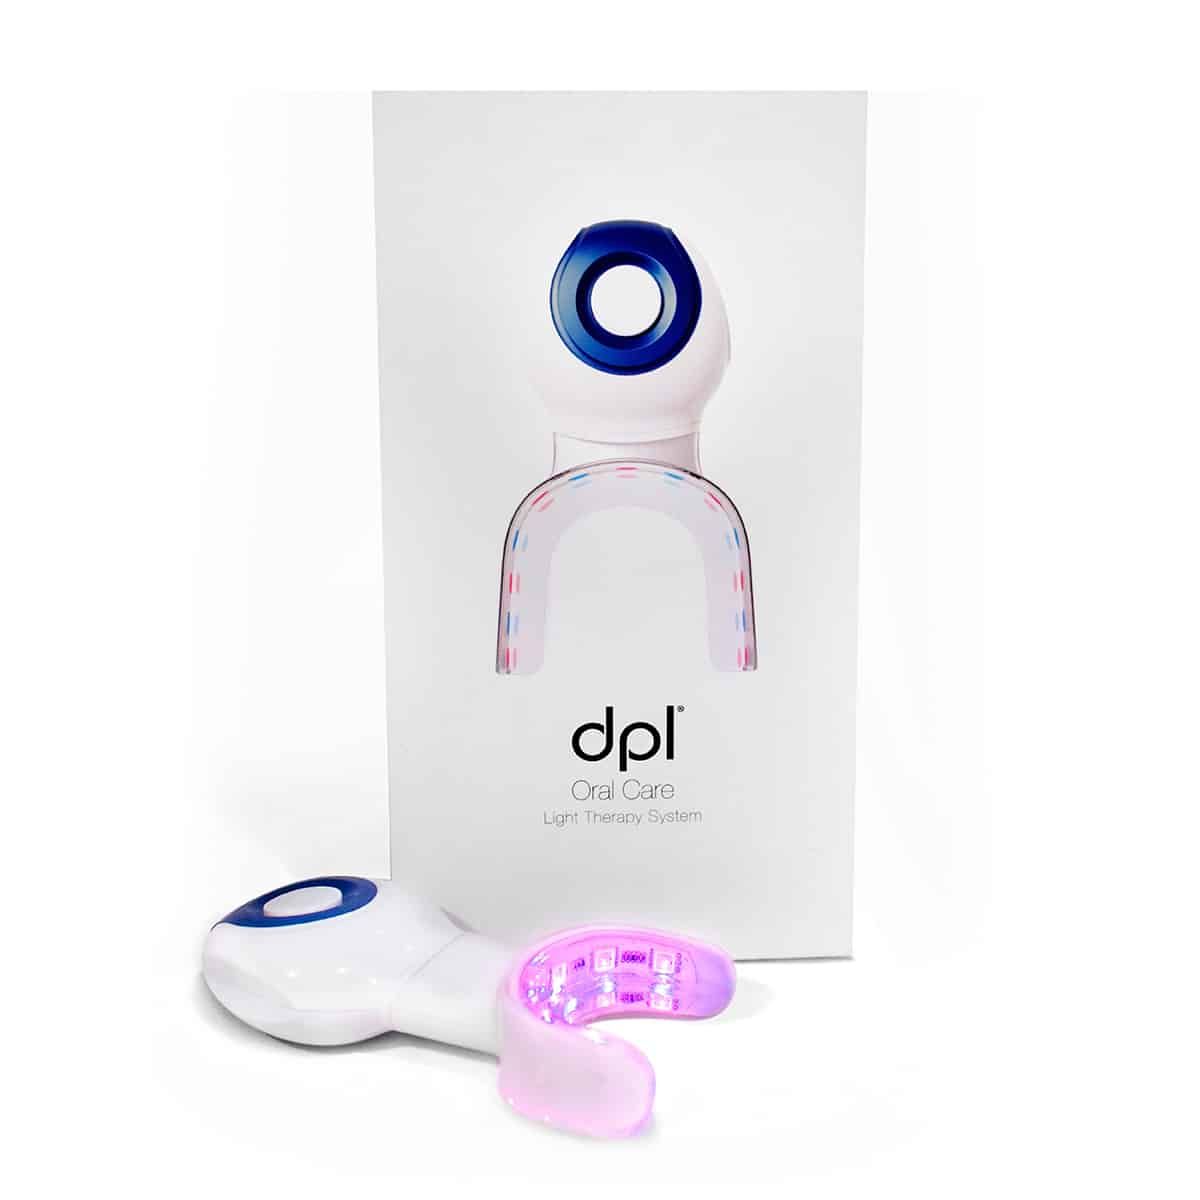 dpl® Oral Care Light Therapy System for Teeth & Gums